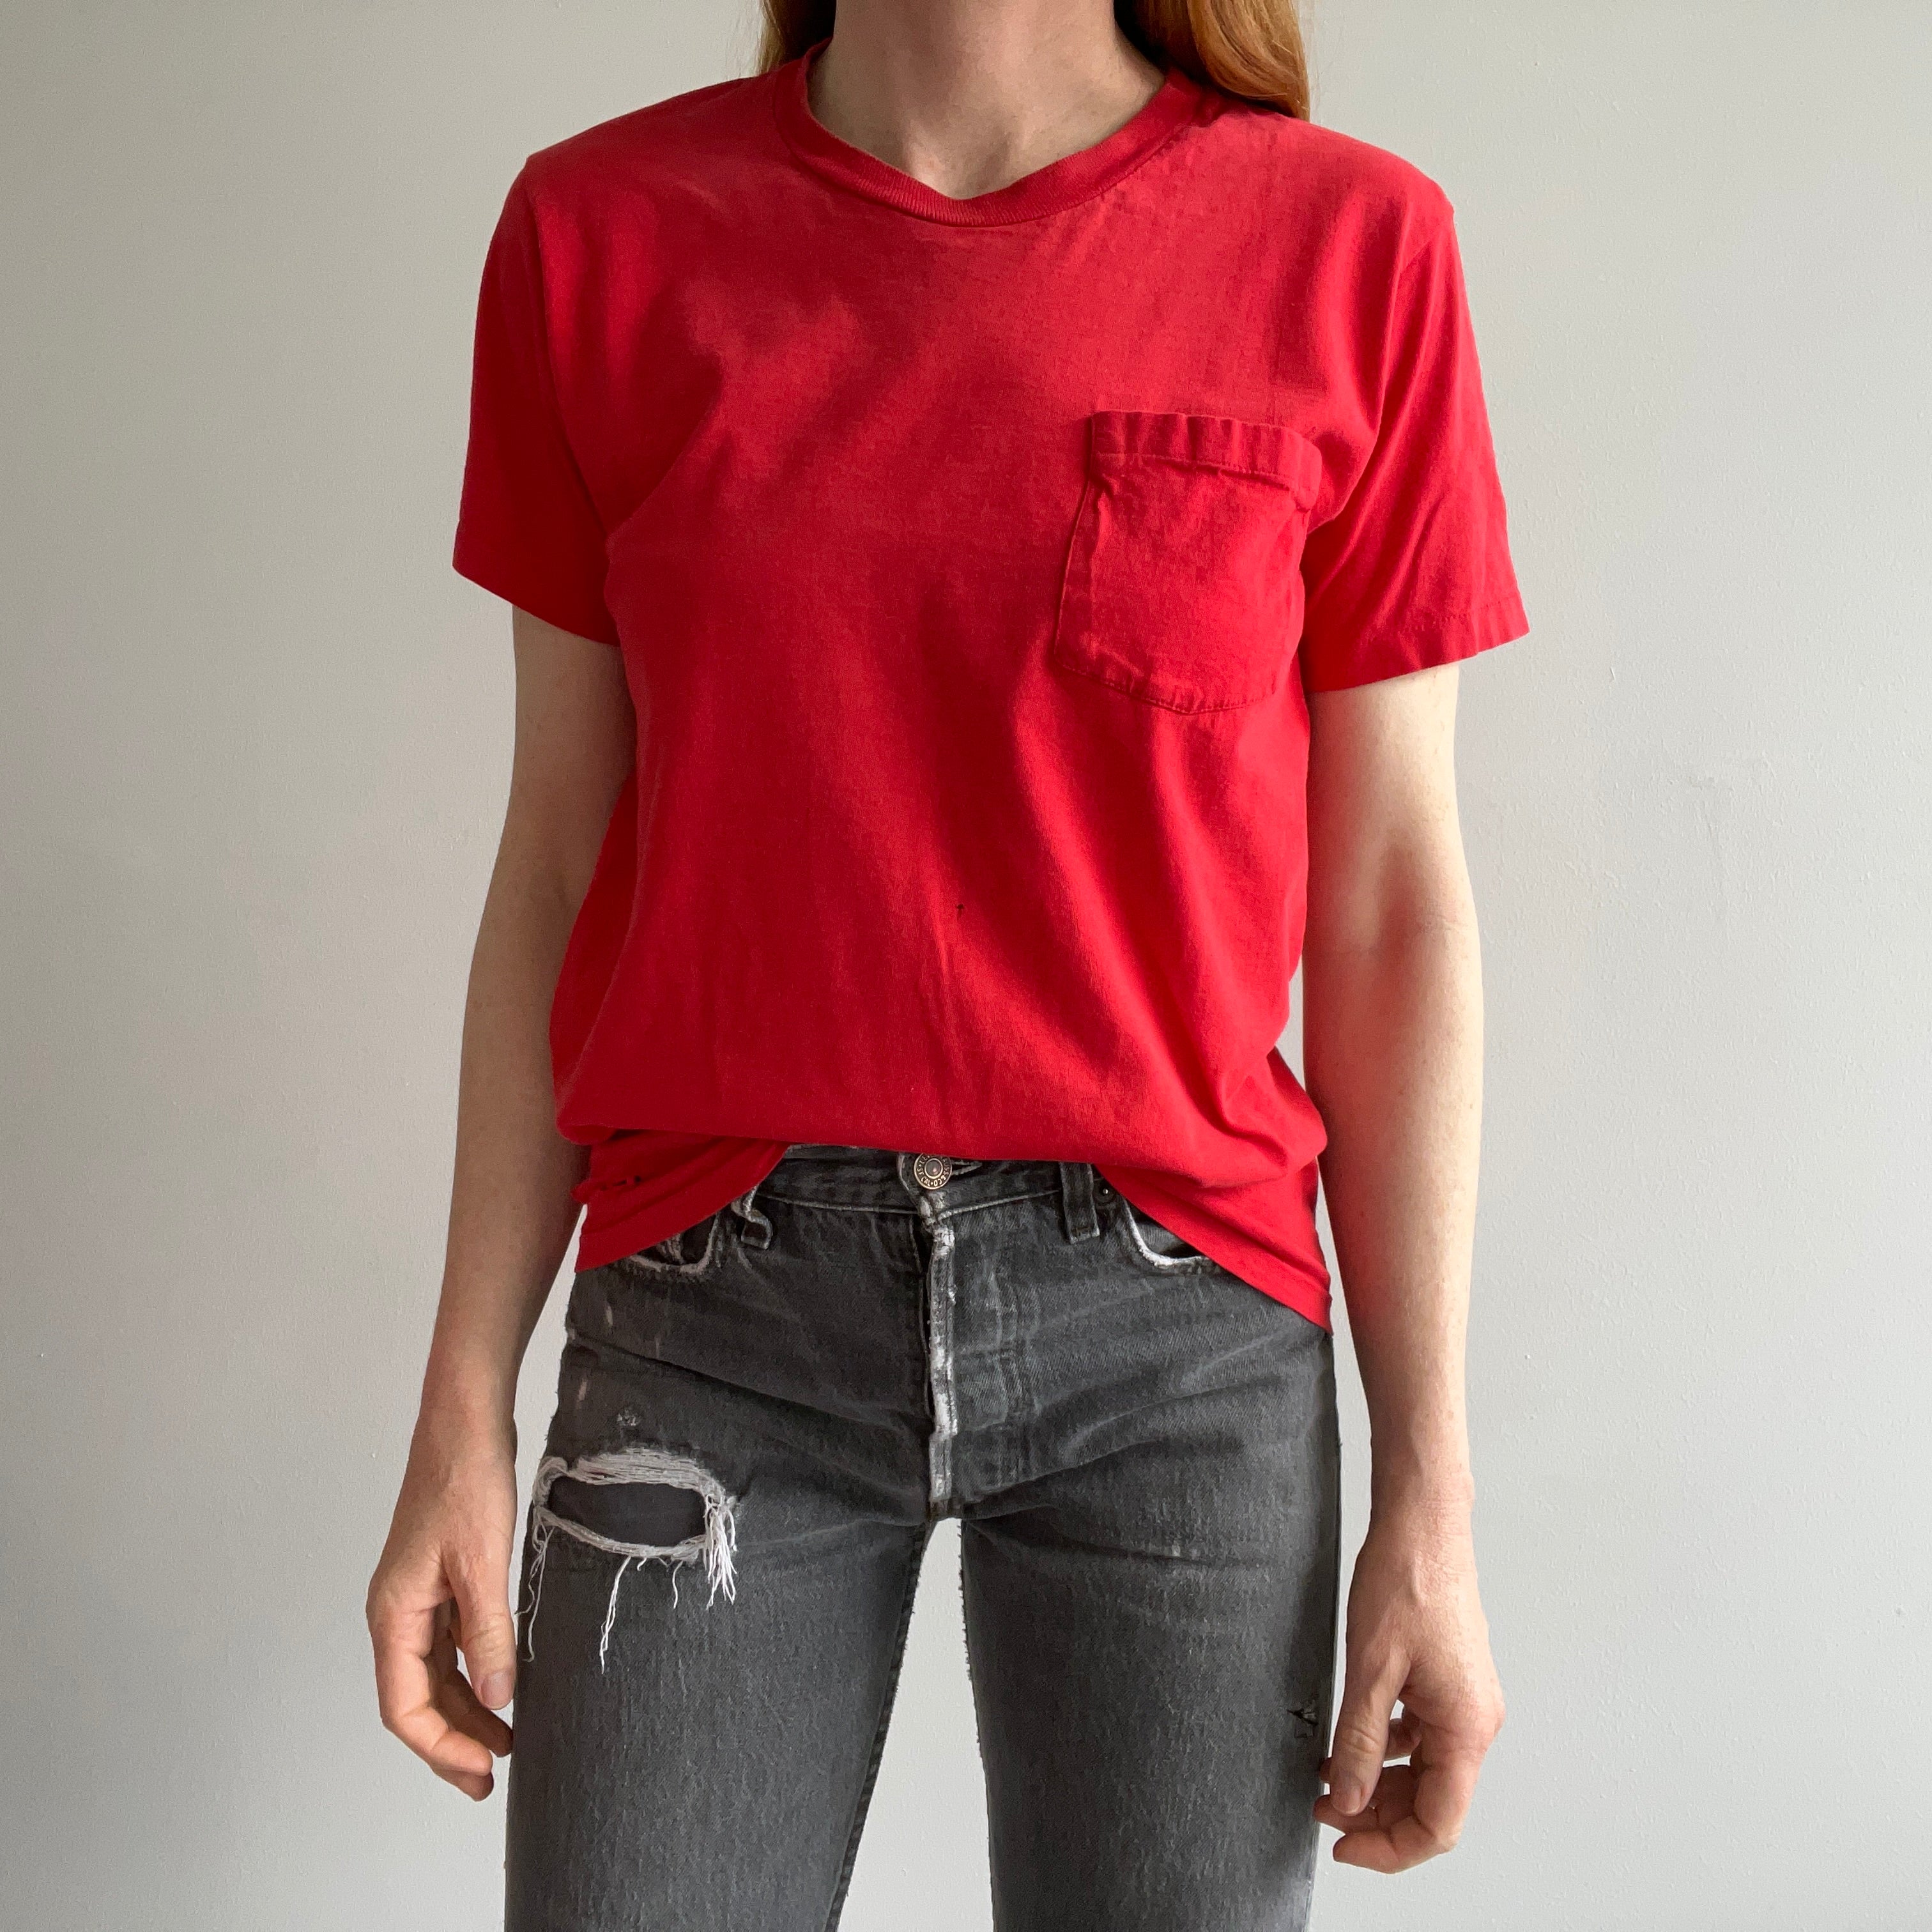 1980s Nicely Stained and Beat Up Early 80s Blank Red Pocket T-Shirt